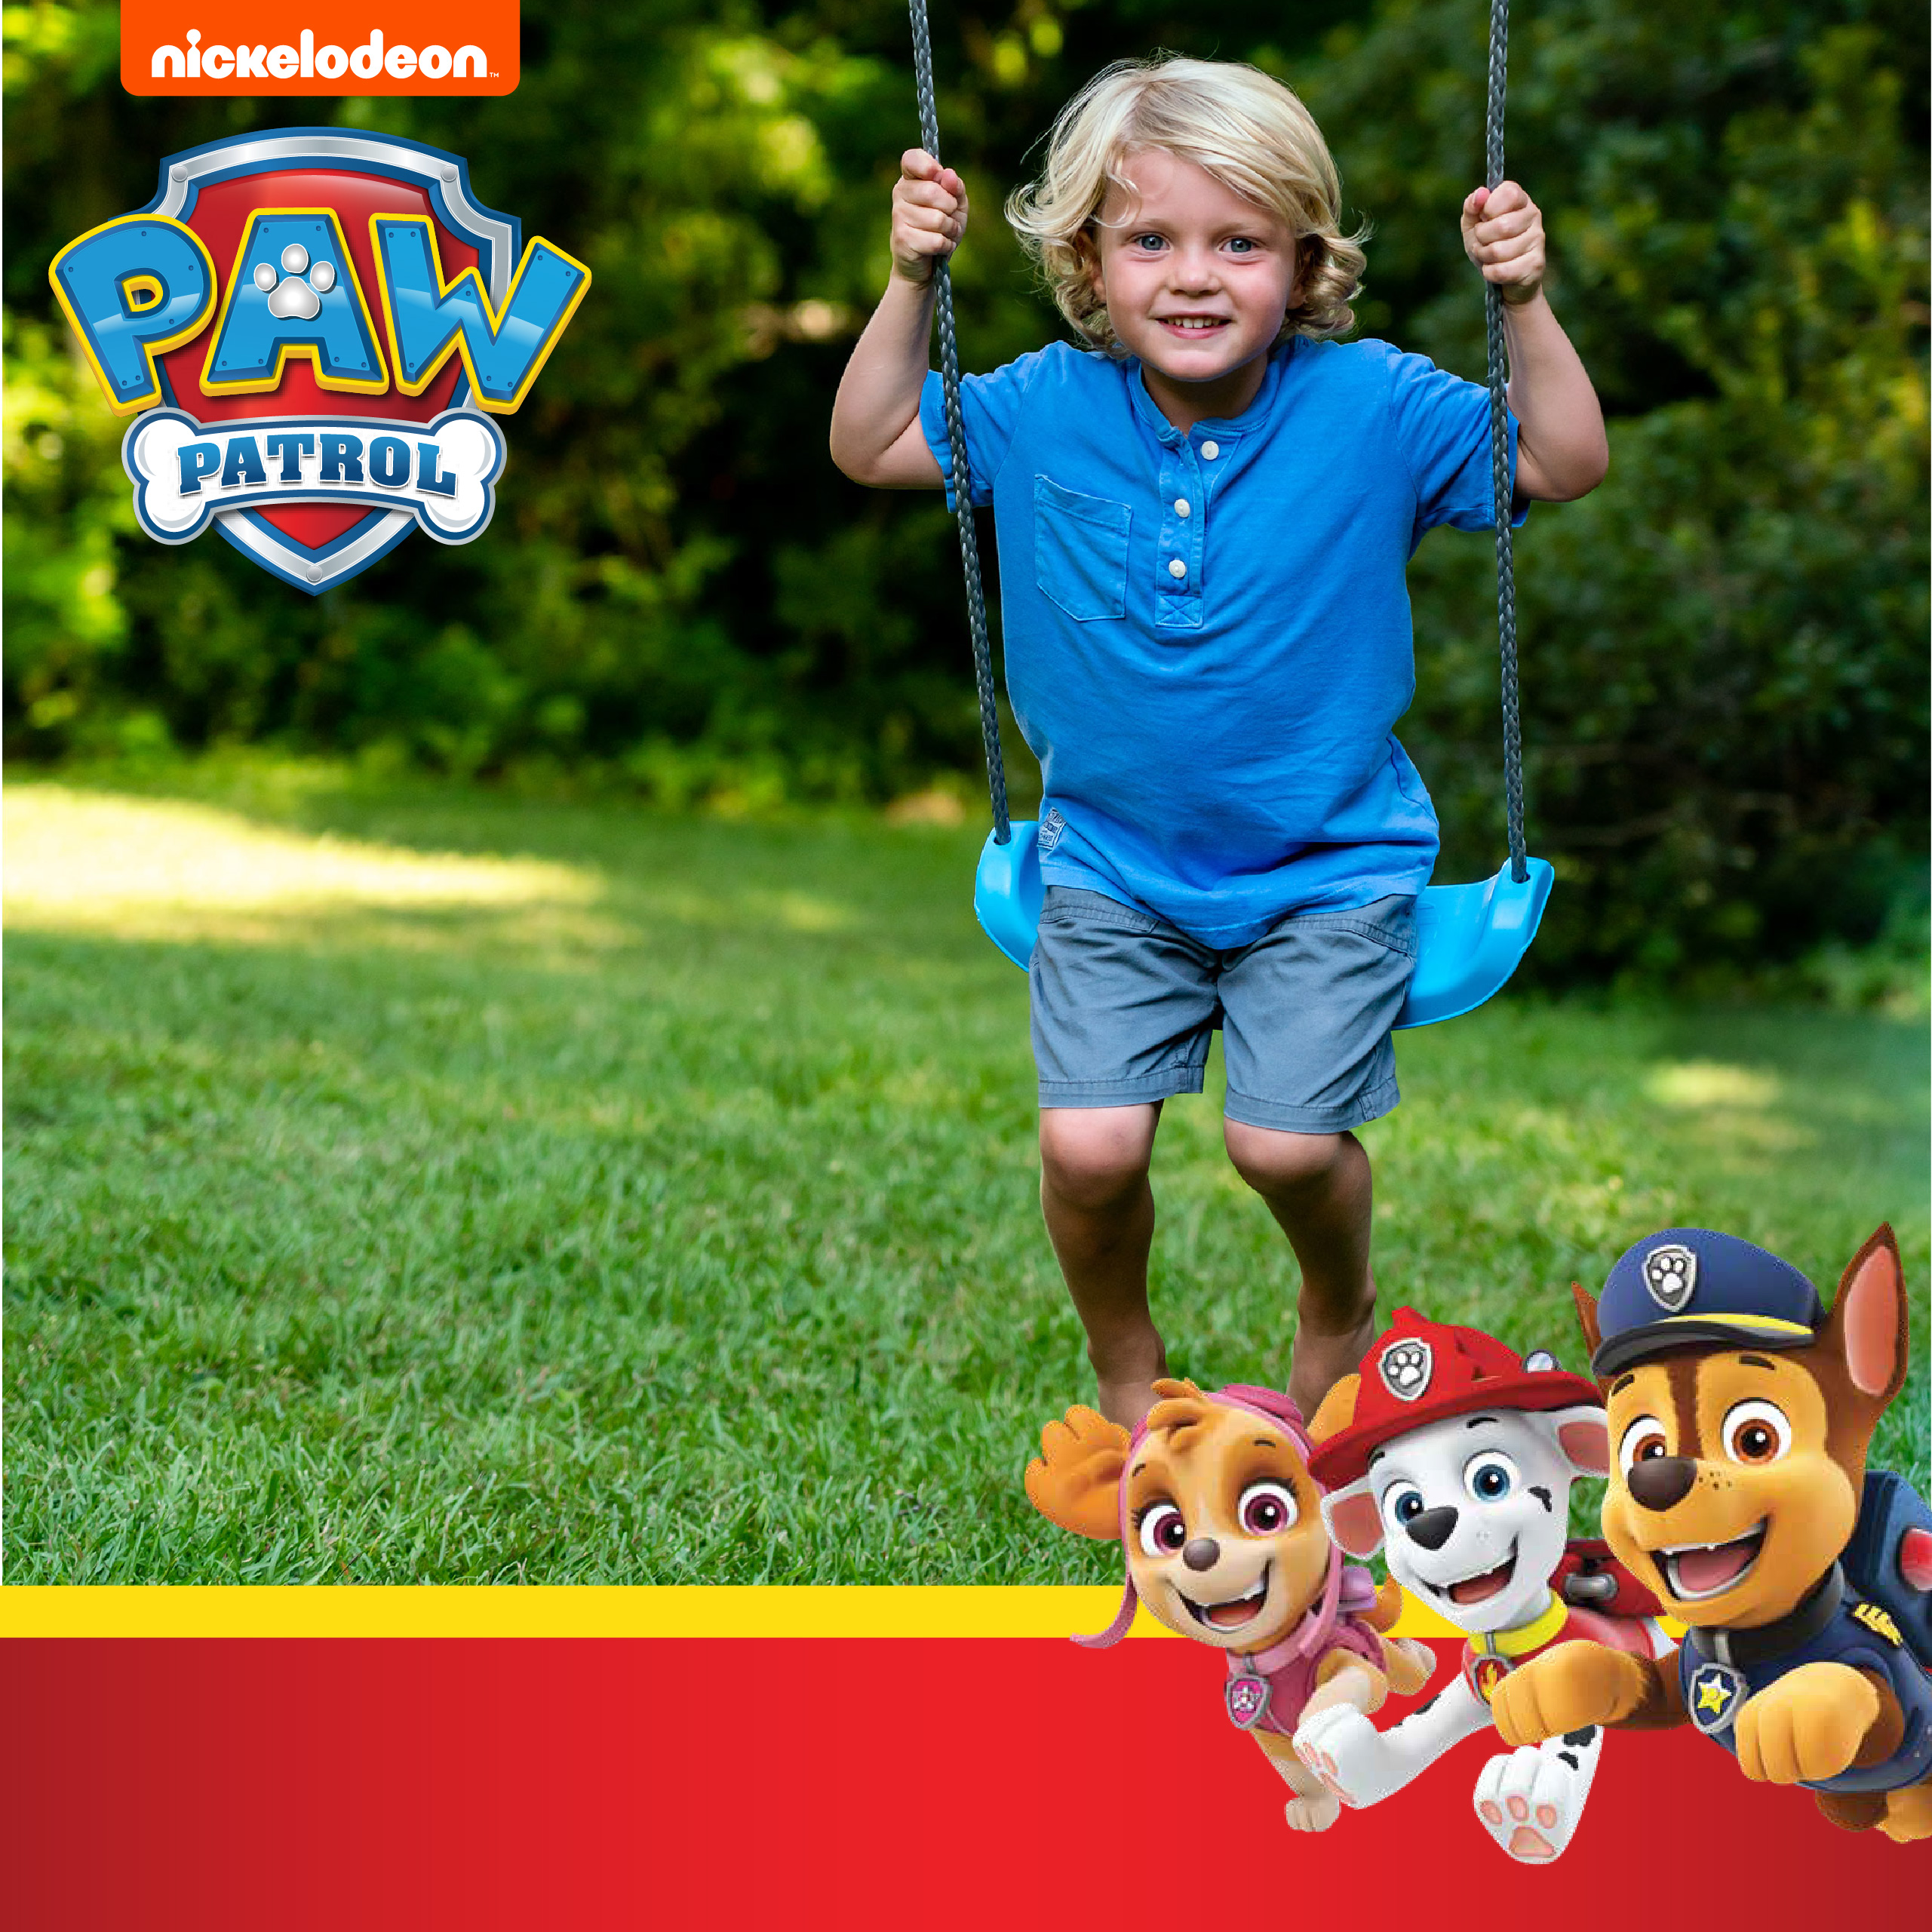 Swurfer Paw Patrol Deluxe Swing Set for Kids, Ages 4 and Up - image 4 of 7